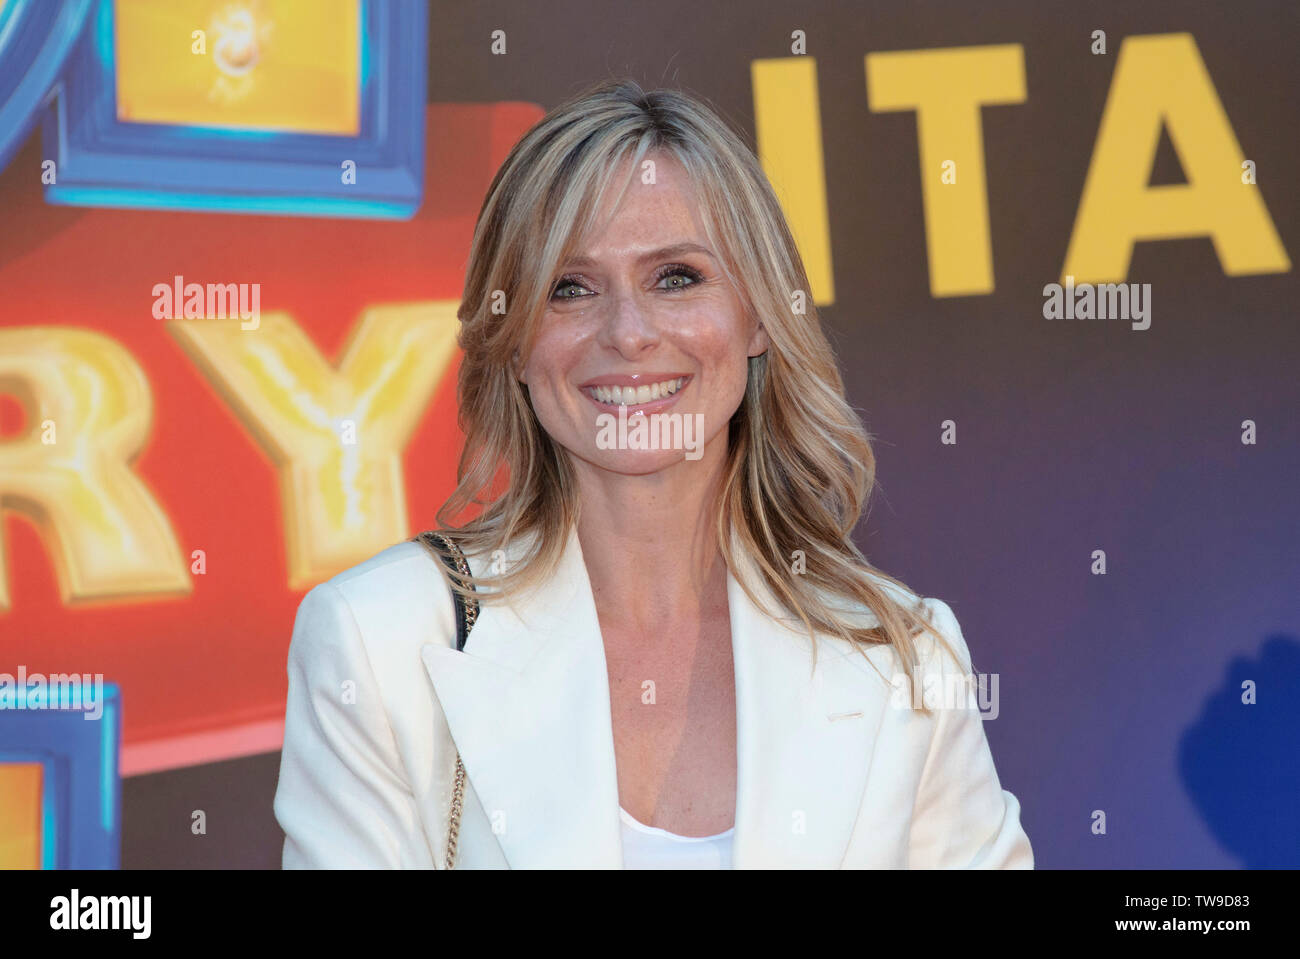 Italian tv celebrities attend the red carpet of Toy Story 4 at Studios in Rome Stock Photo